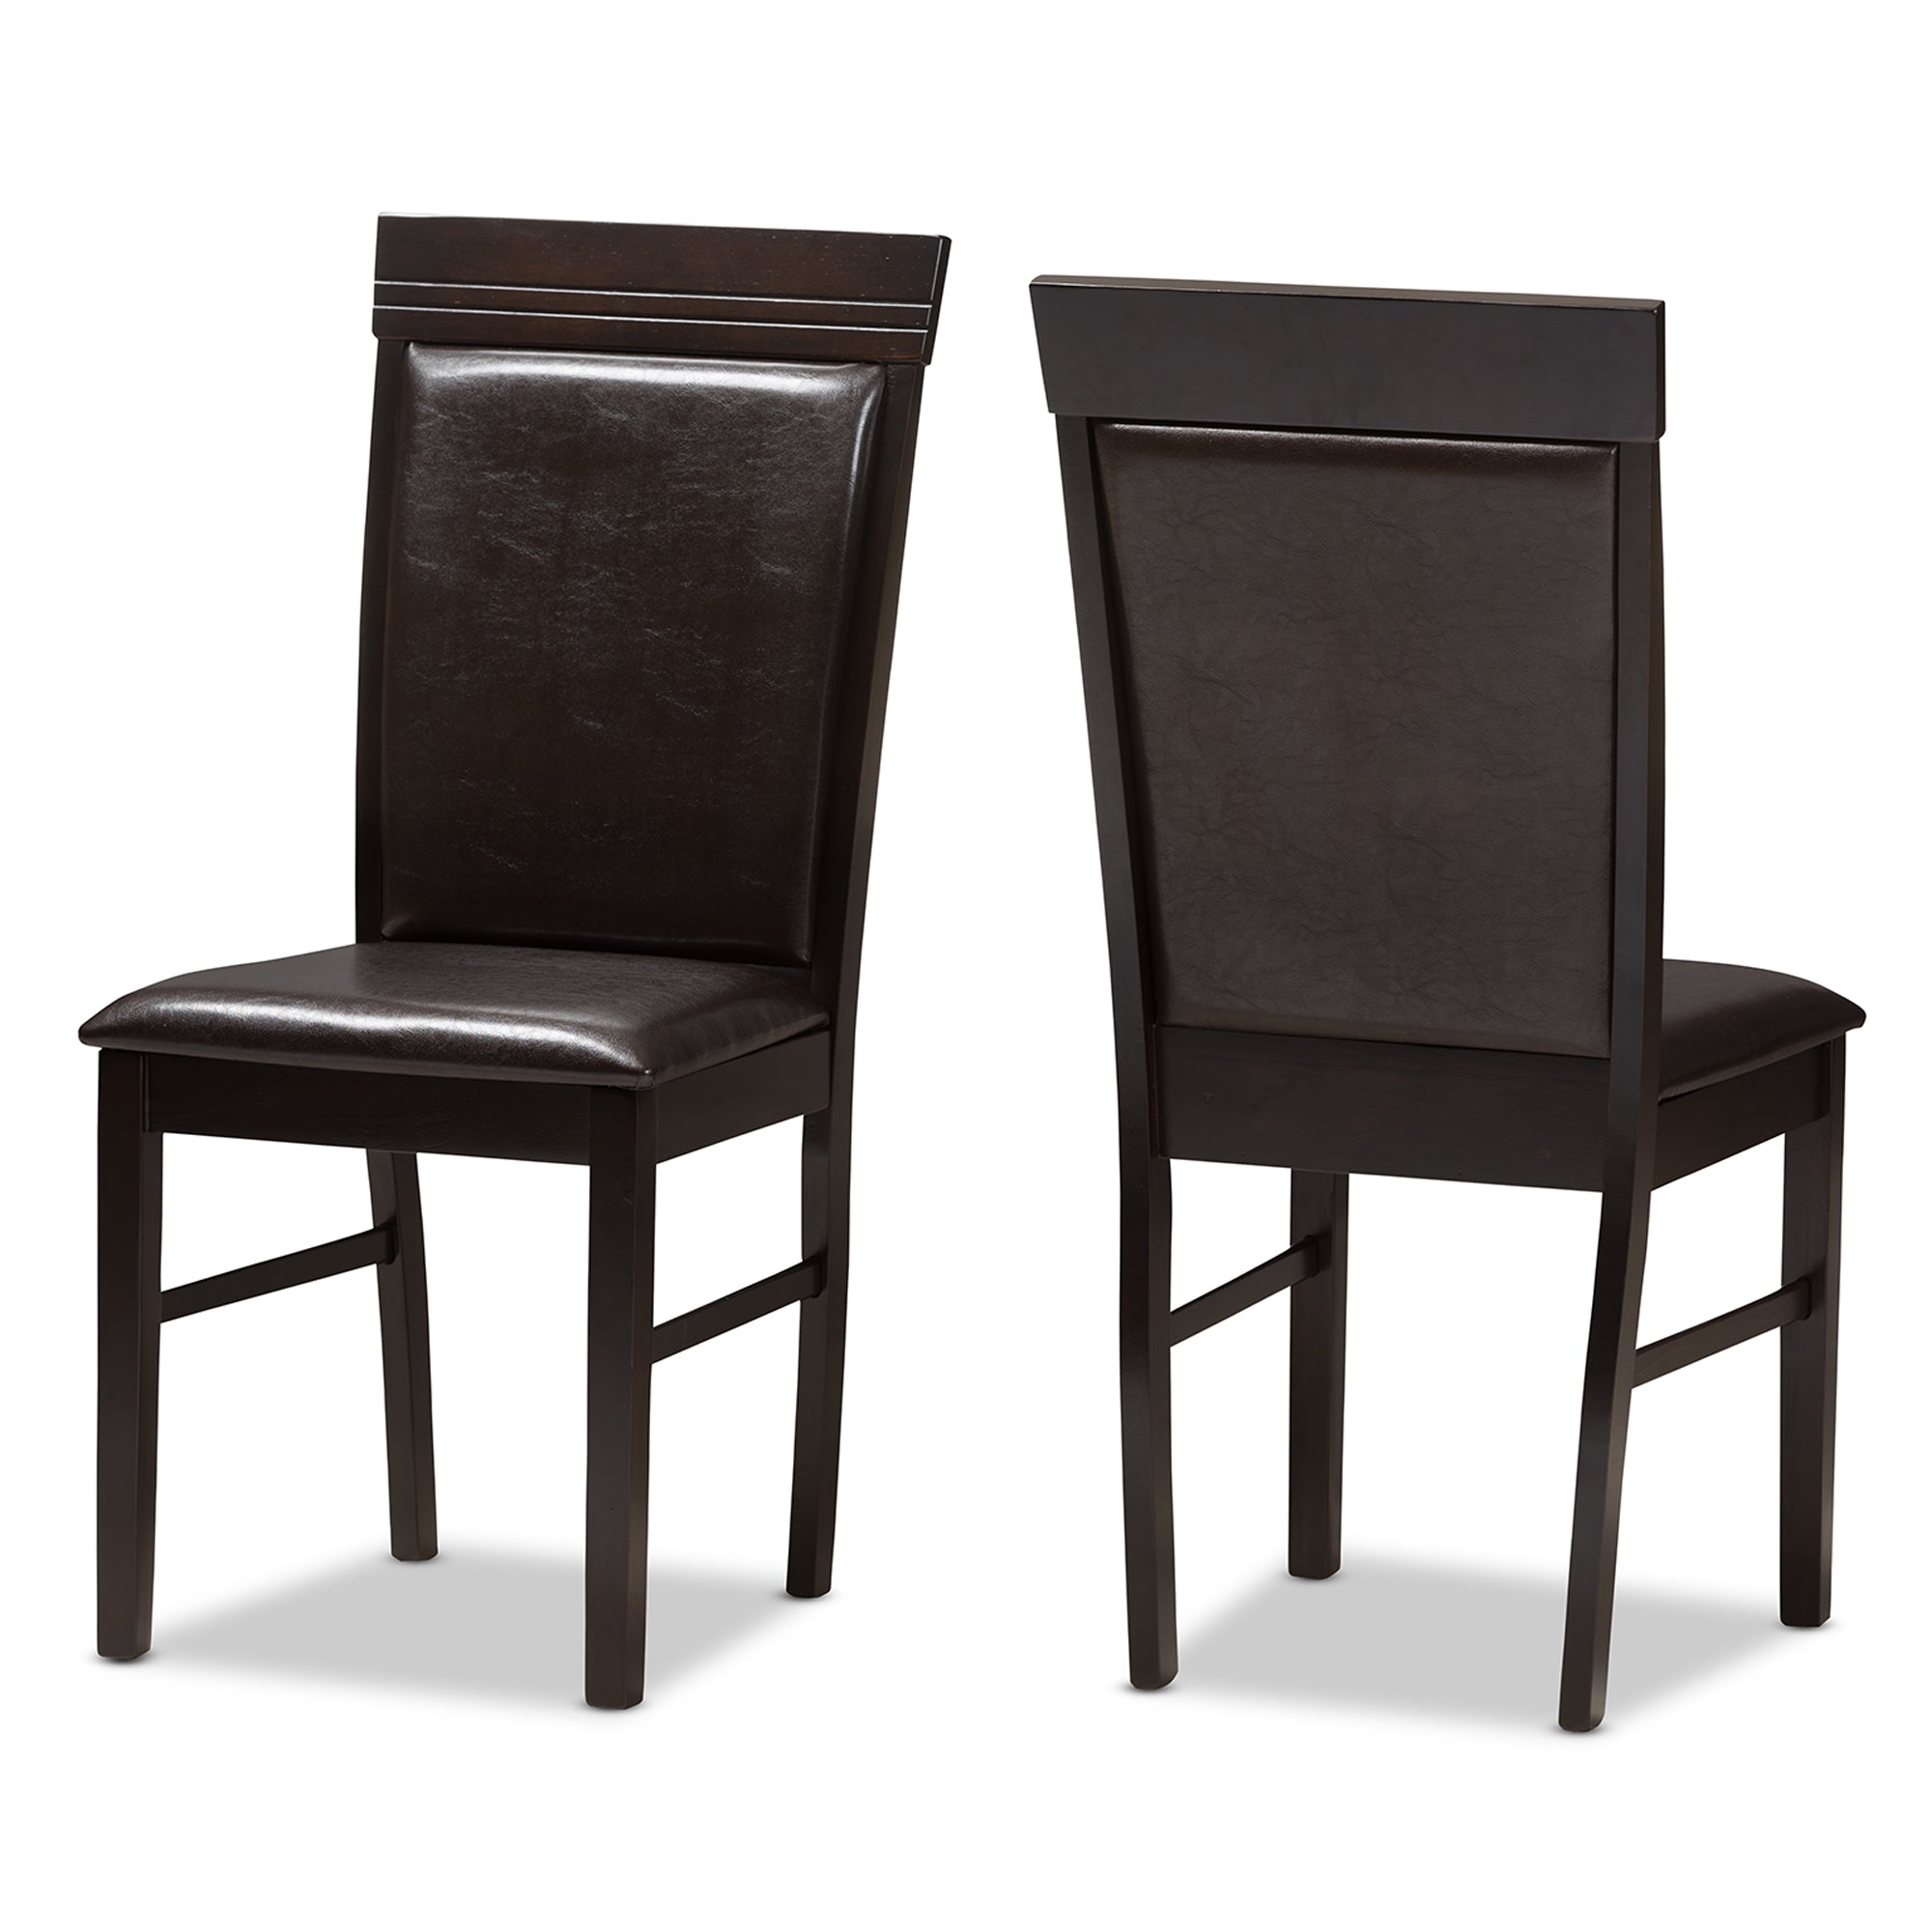 Thea Contemporary Table & Dining Chairs 5-Piece-Dining Set-Baxton Studio - WI-Wall2Wall Furnishings